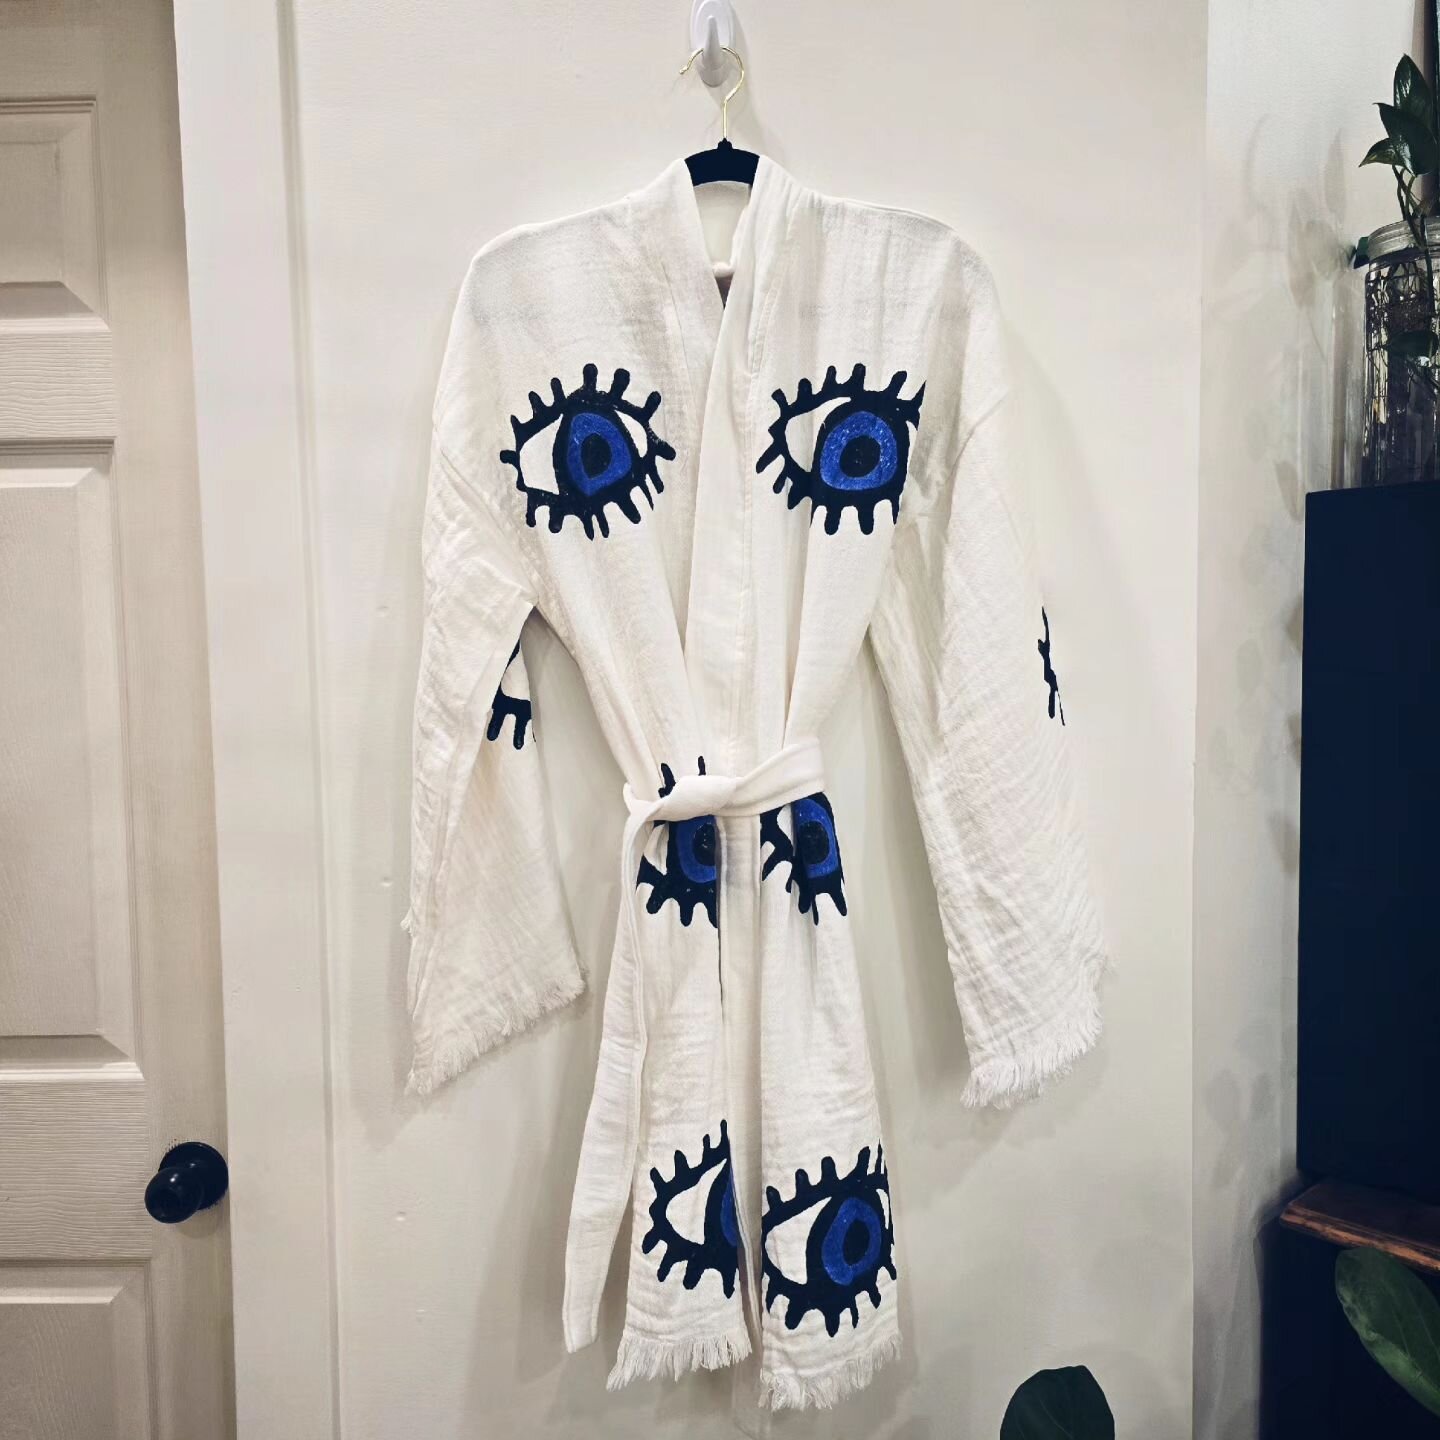 🧿 I couldn't pass these up!! 🧿⁣
⁣
100% organic cotton evil eye robes! They feel so freaking good on my skin omg, so plush!⁣
⁣
I got them at 40% off, so I'm passing the discount on! There are only 4, one short and one long in each style.⁣
⁣
As alway